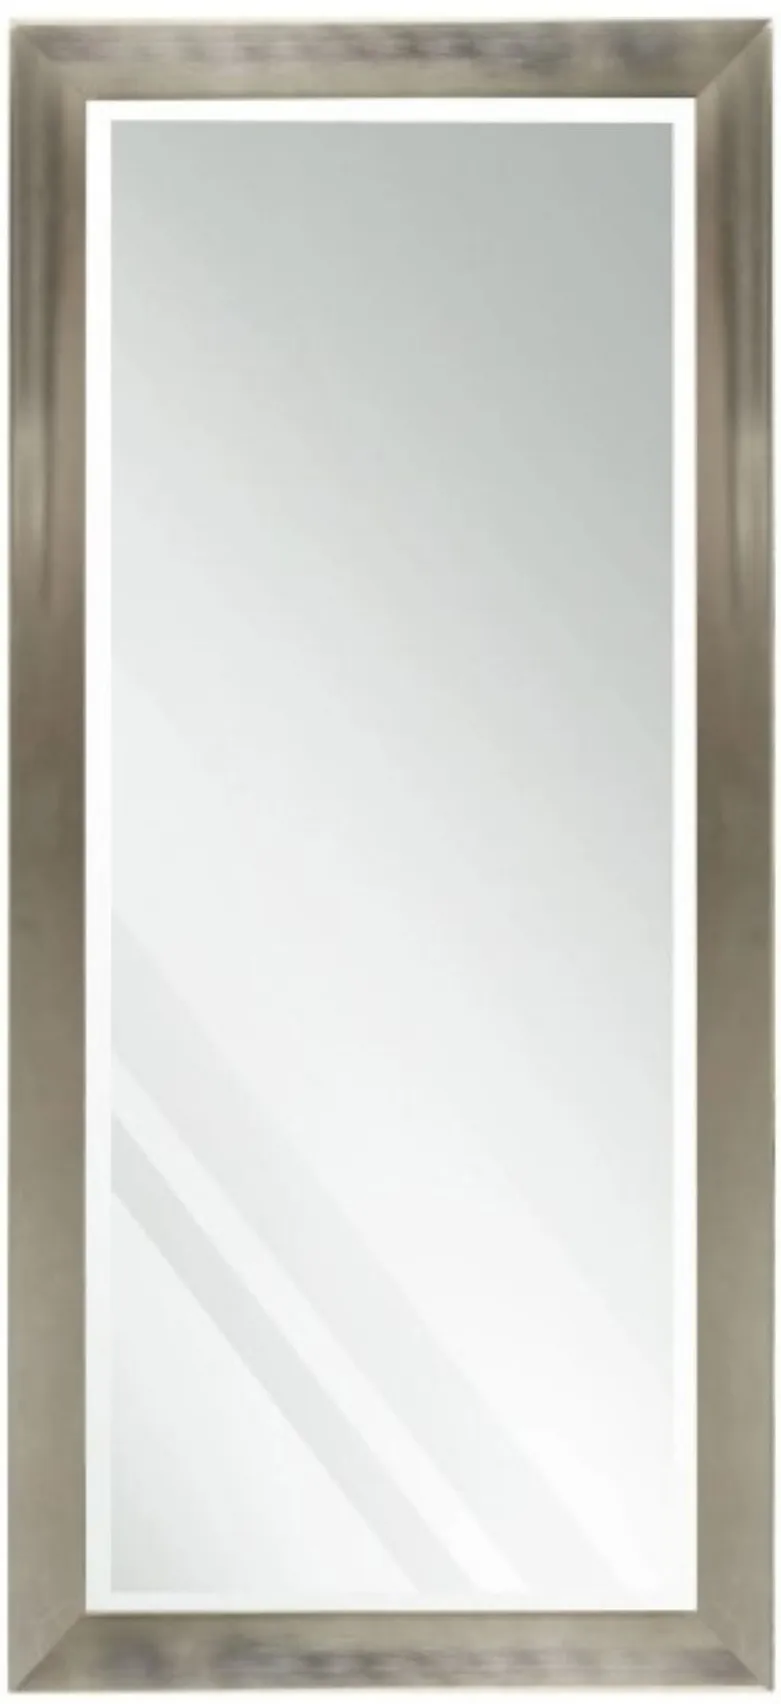 Beveled Silver and Bronze Finish Leaner Mirror 30"W x 64"H